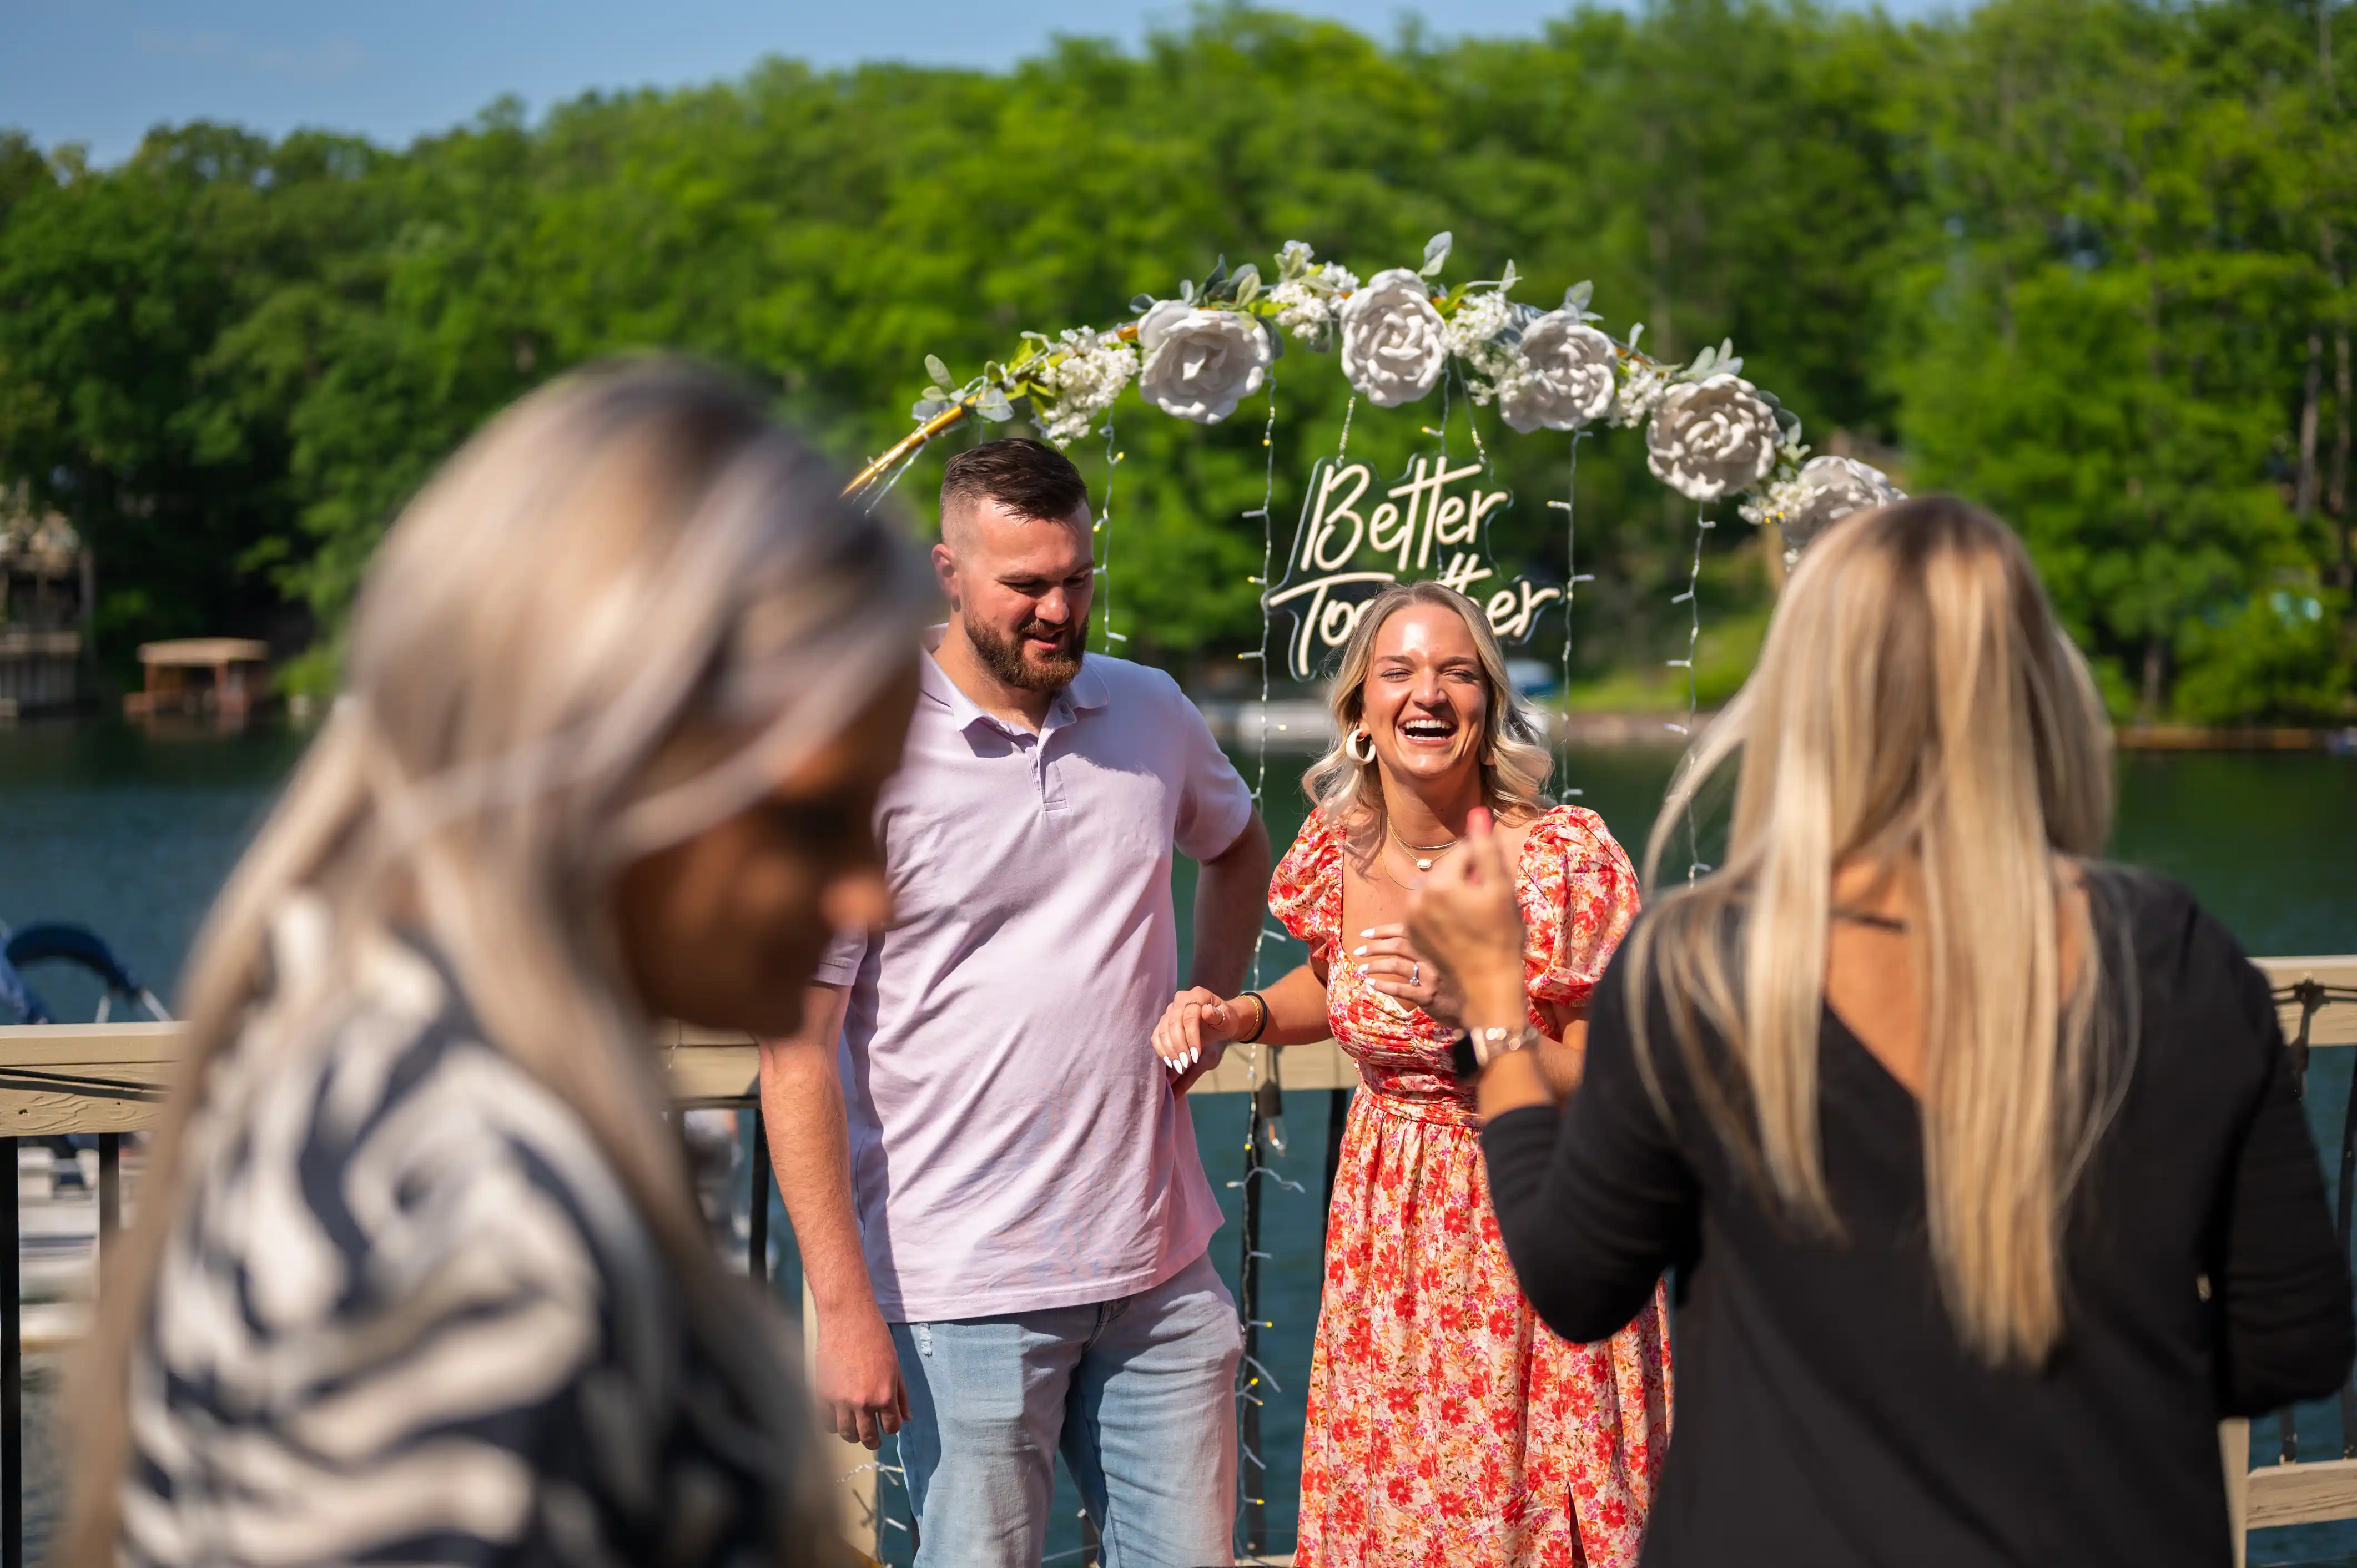 A couple is engaging with a woman applauding them in the foreground, with an arch decorated with flowers and "Better Together" sign in the background by a lake.